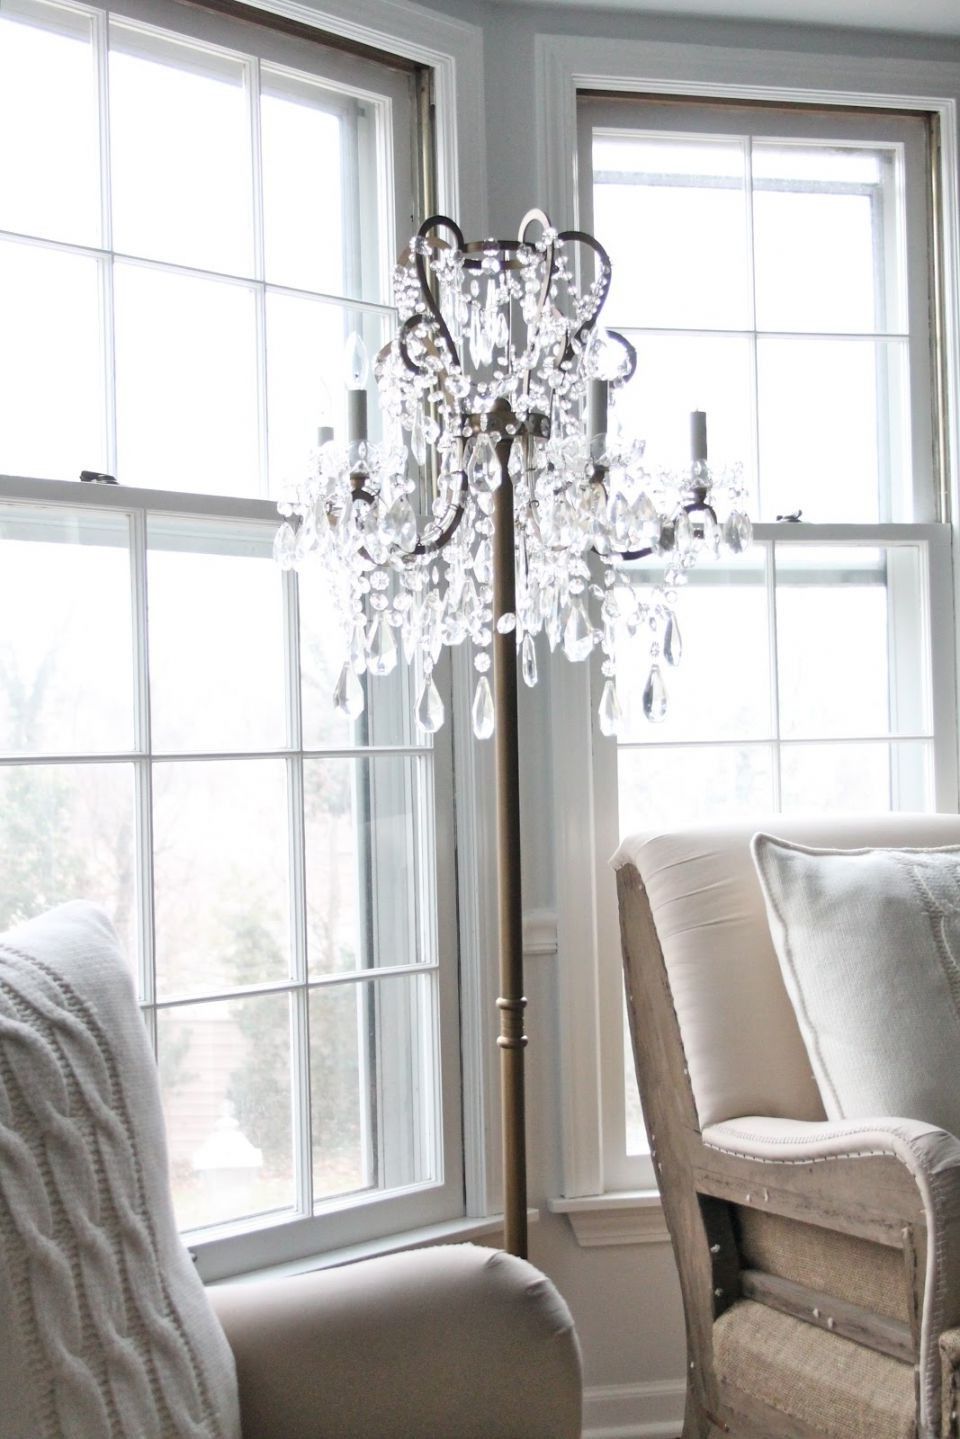 Chandelier Style Floor Lamps Within Current Chandelier Floor Lamps – Ideas On Foter (View 10 of 15)